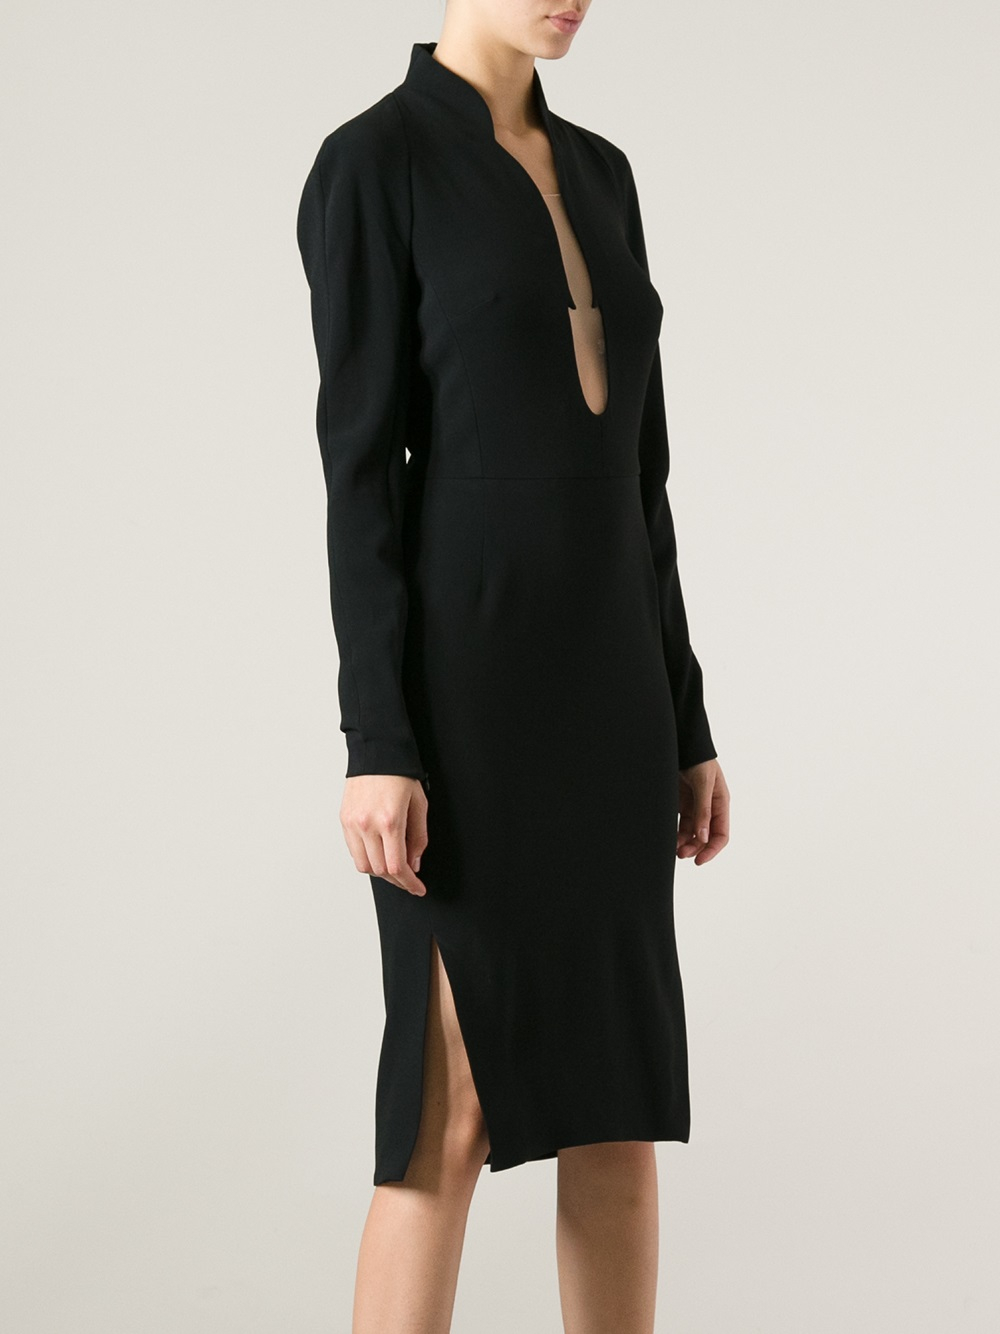 Tom Ford Backless Dress in Black - Lyst